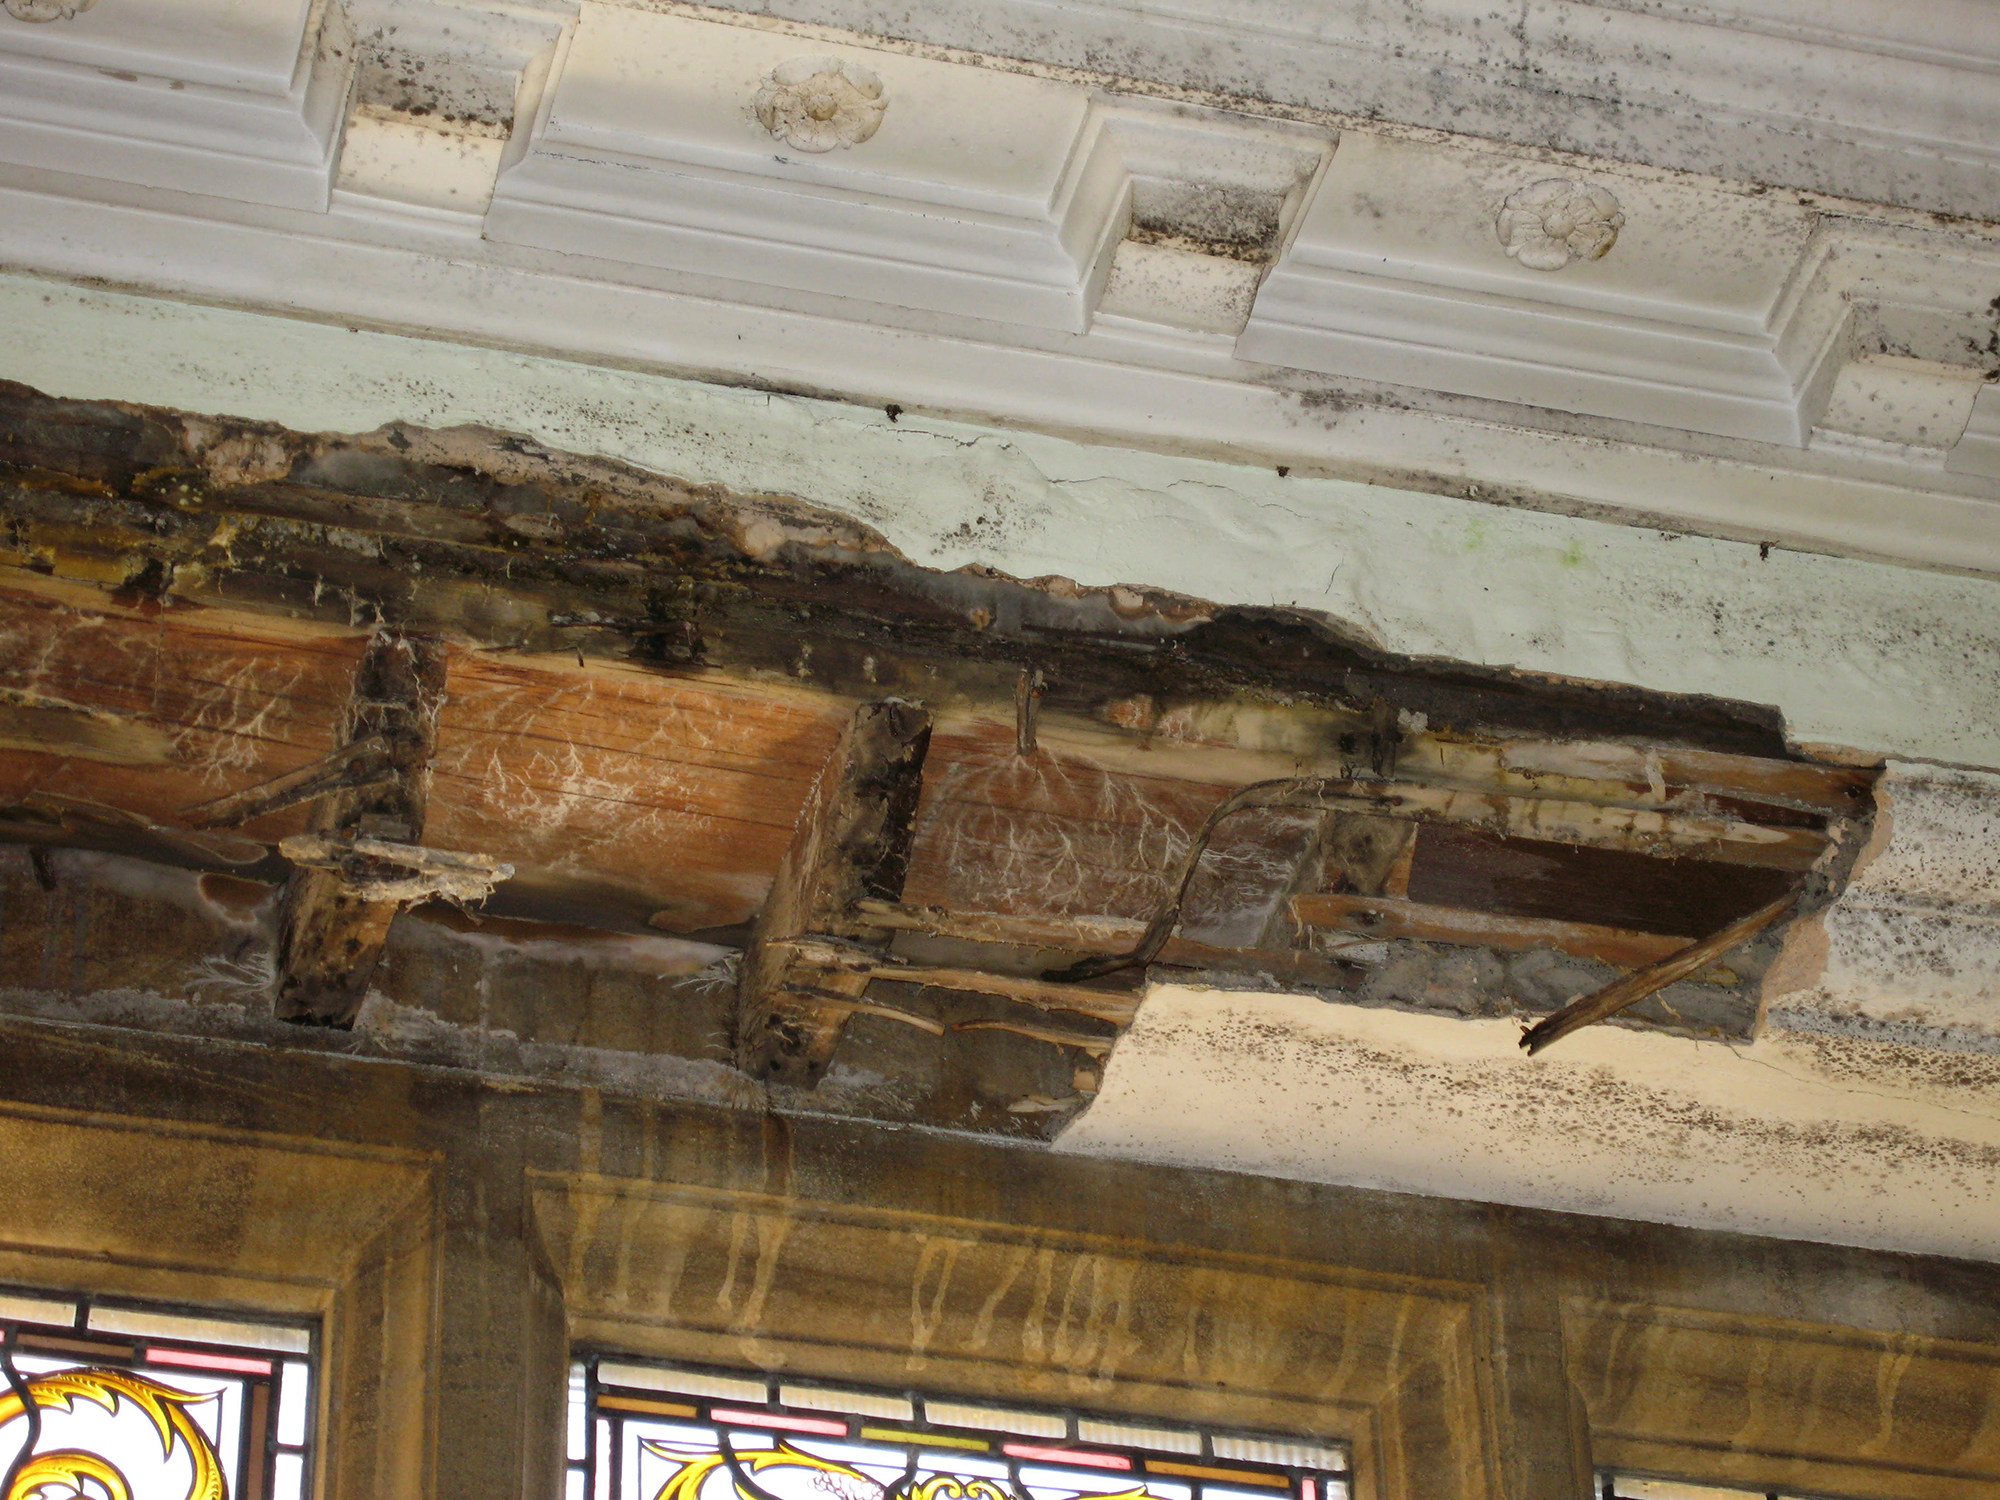 A white plaster cornice has partly collapsed, exposing the timber. Part of a wood-framed stained glass window can be seen in the foreground